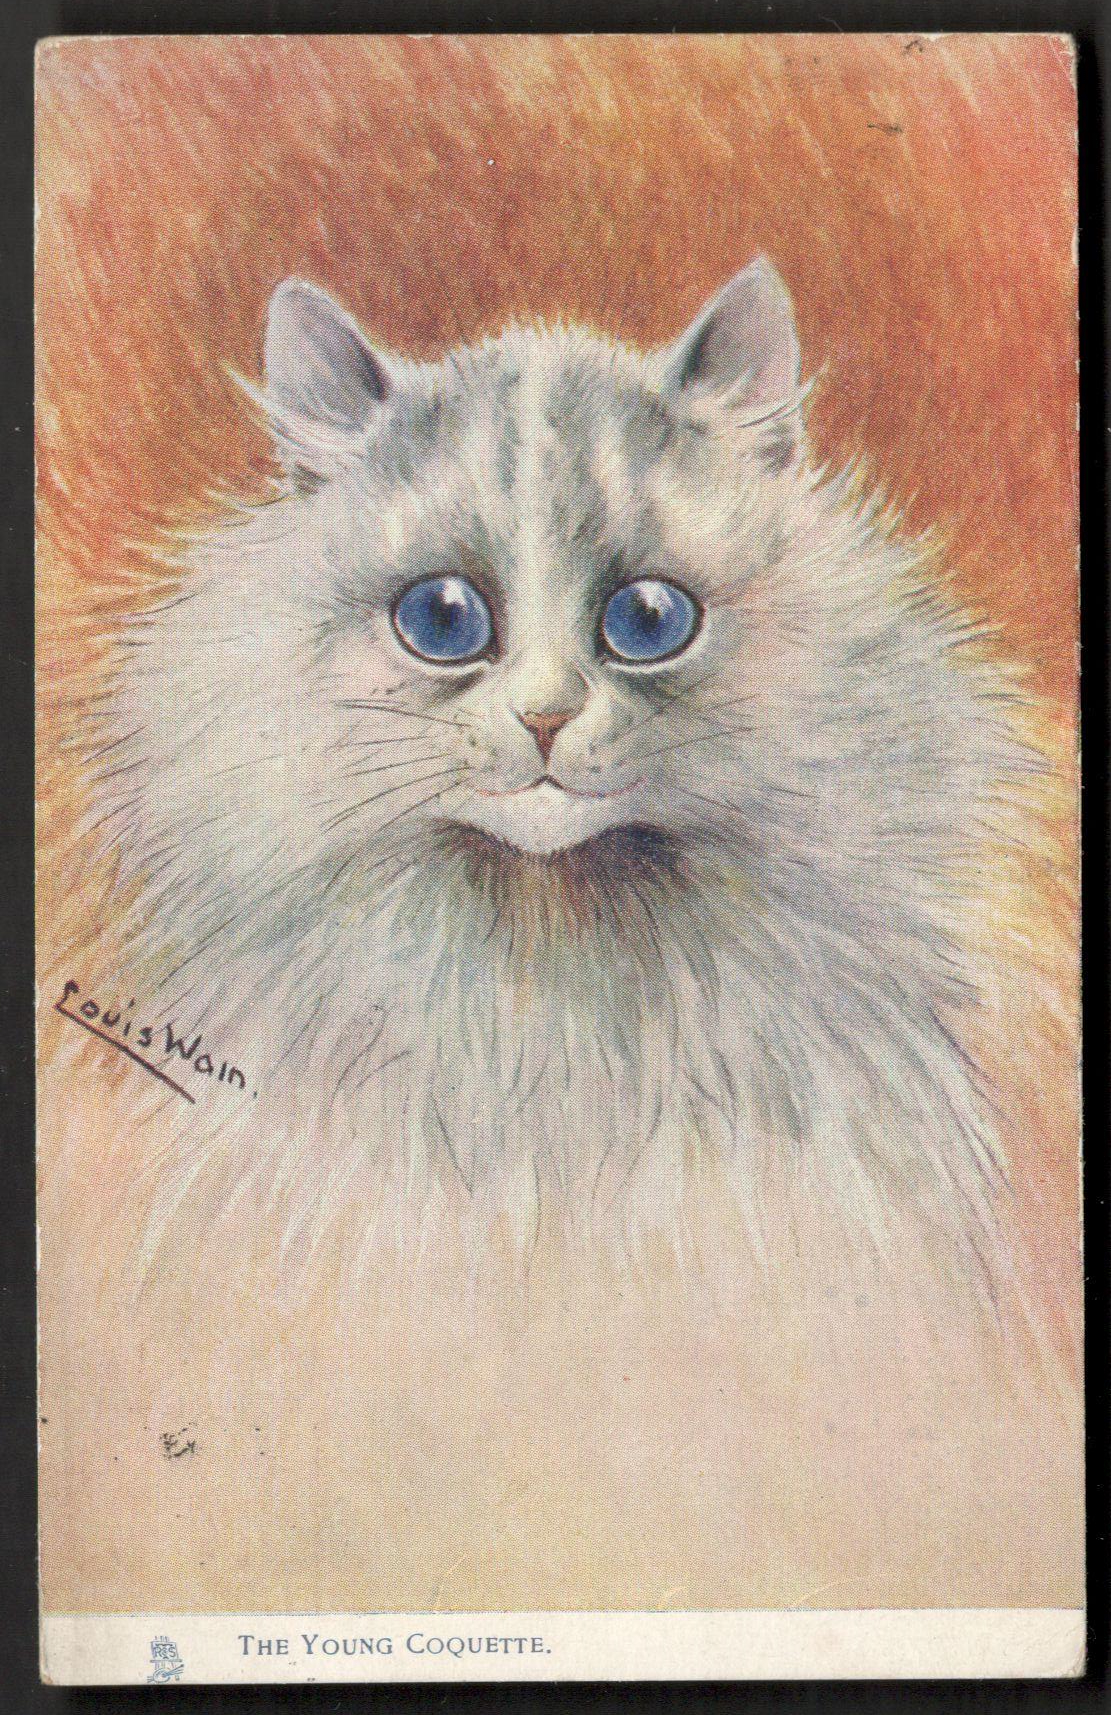 THE YOUNG COQUETTE BY LOUIS WAIN EARLY POSTCARD